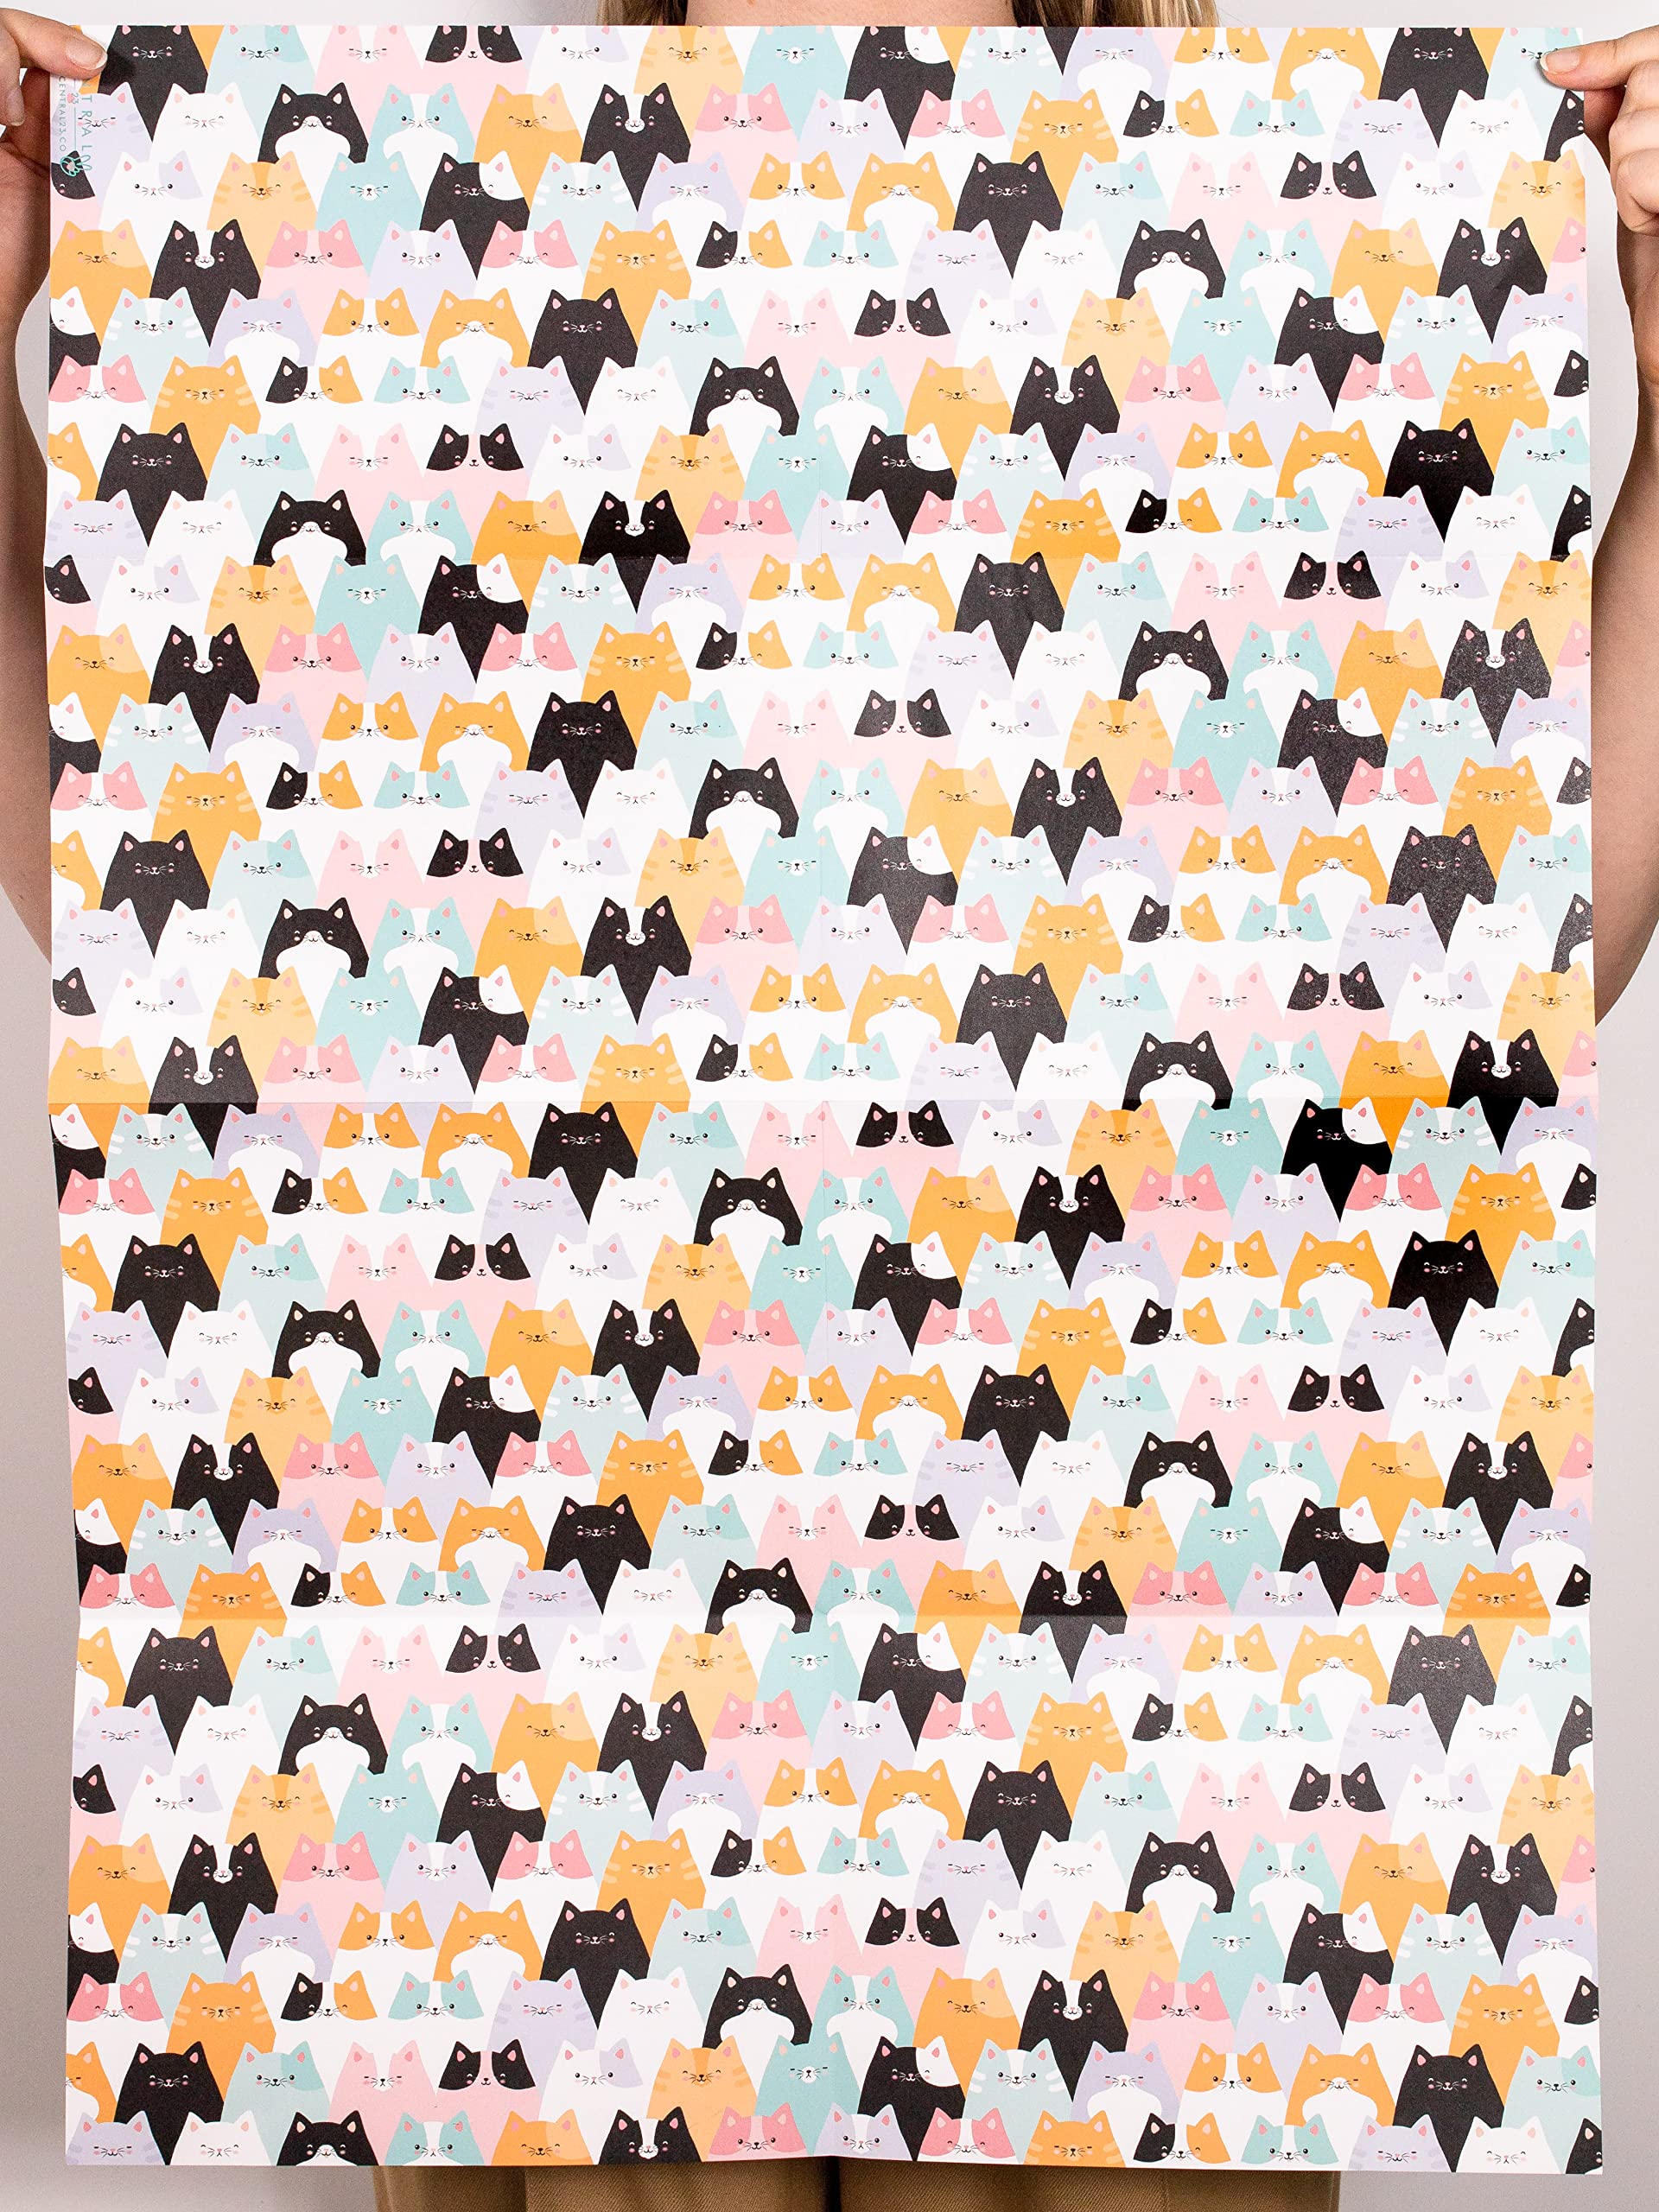 Cats Wrapping Paper - 6 Sheets of Birthday Gift Wrap for Her - Kitten Kities - Fun Gift Wrap for Cat Owner - For Fur Mum - Pastel Colors - Recyclable - By Central 23